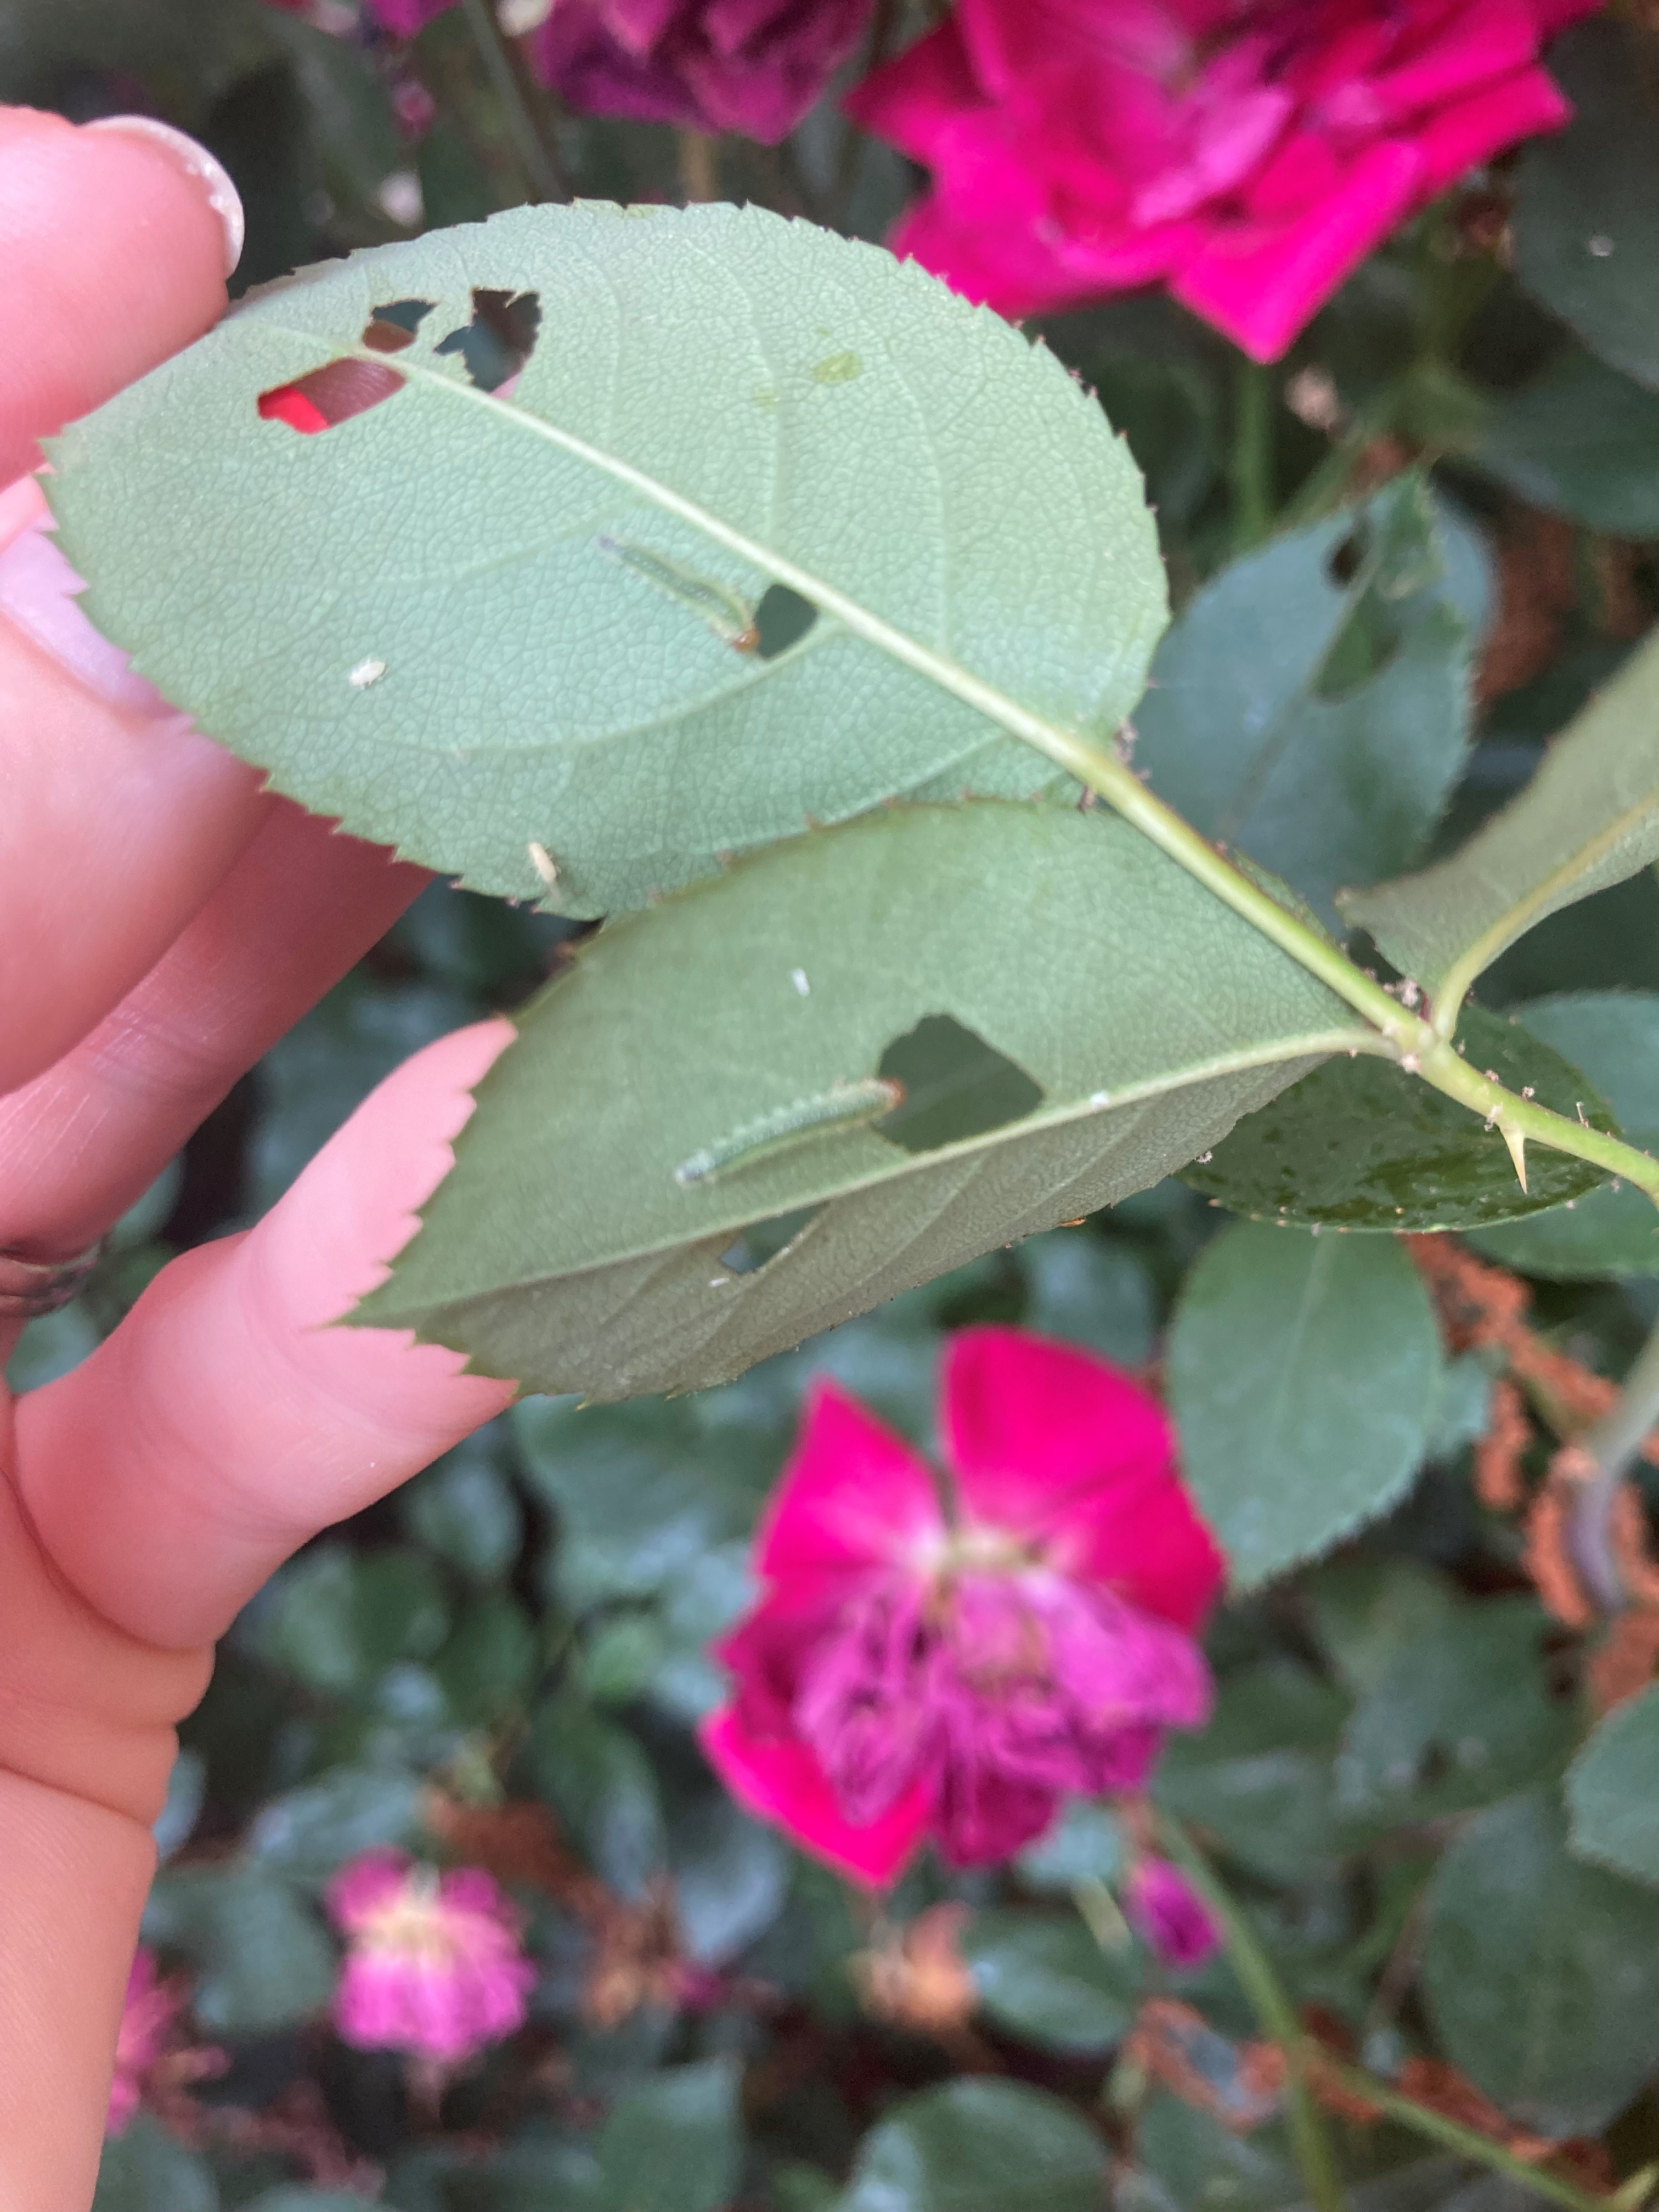 What's eating your rose leaves?